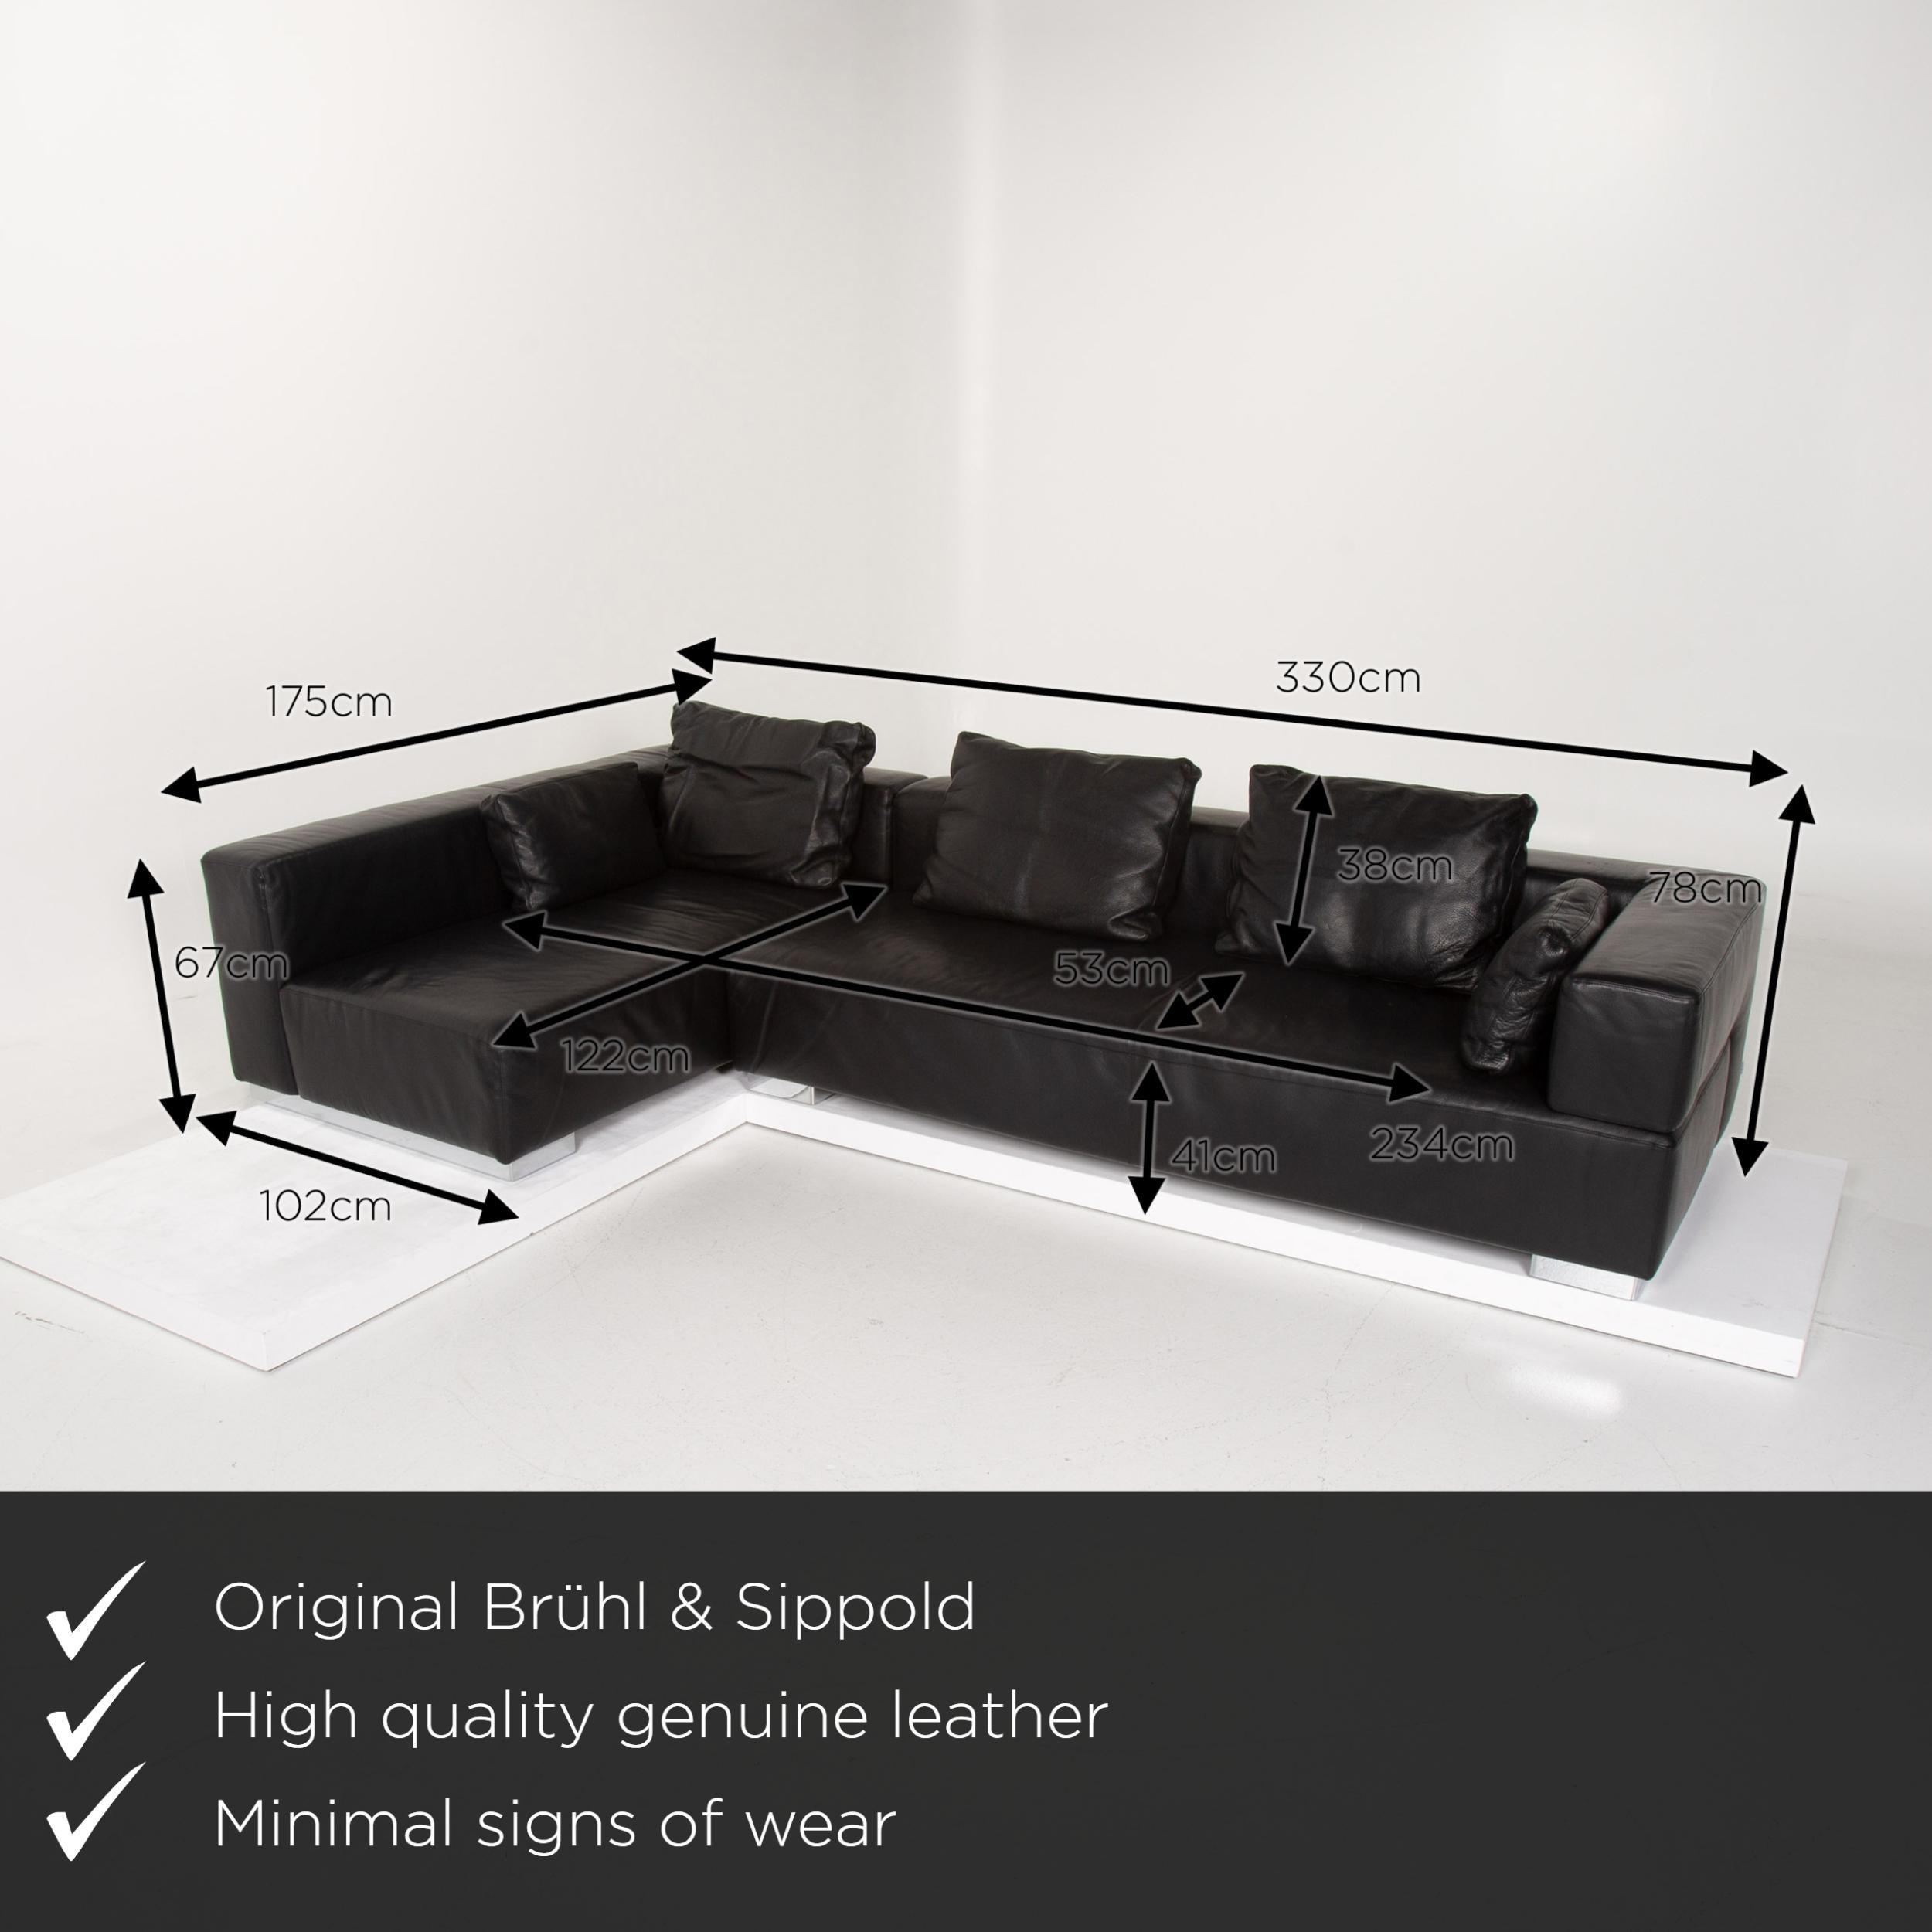 We present to you a Brühl & Sippold leather sofa black corner sofa.


 Product measurements in centimeters:
 

Depth 102
Width 175
Height 78
Seat height 41
Rest height 67
Seat depth 122
Seat width 122
Back height 38.

 